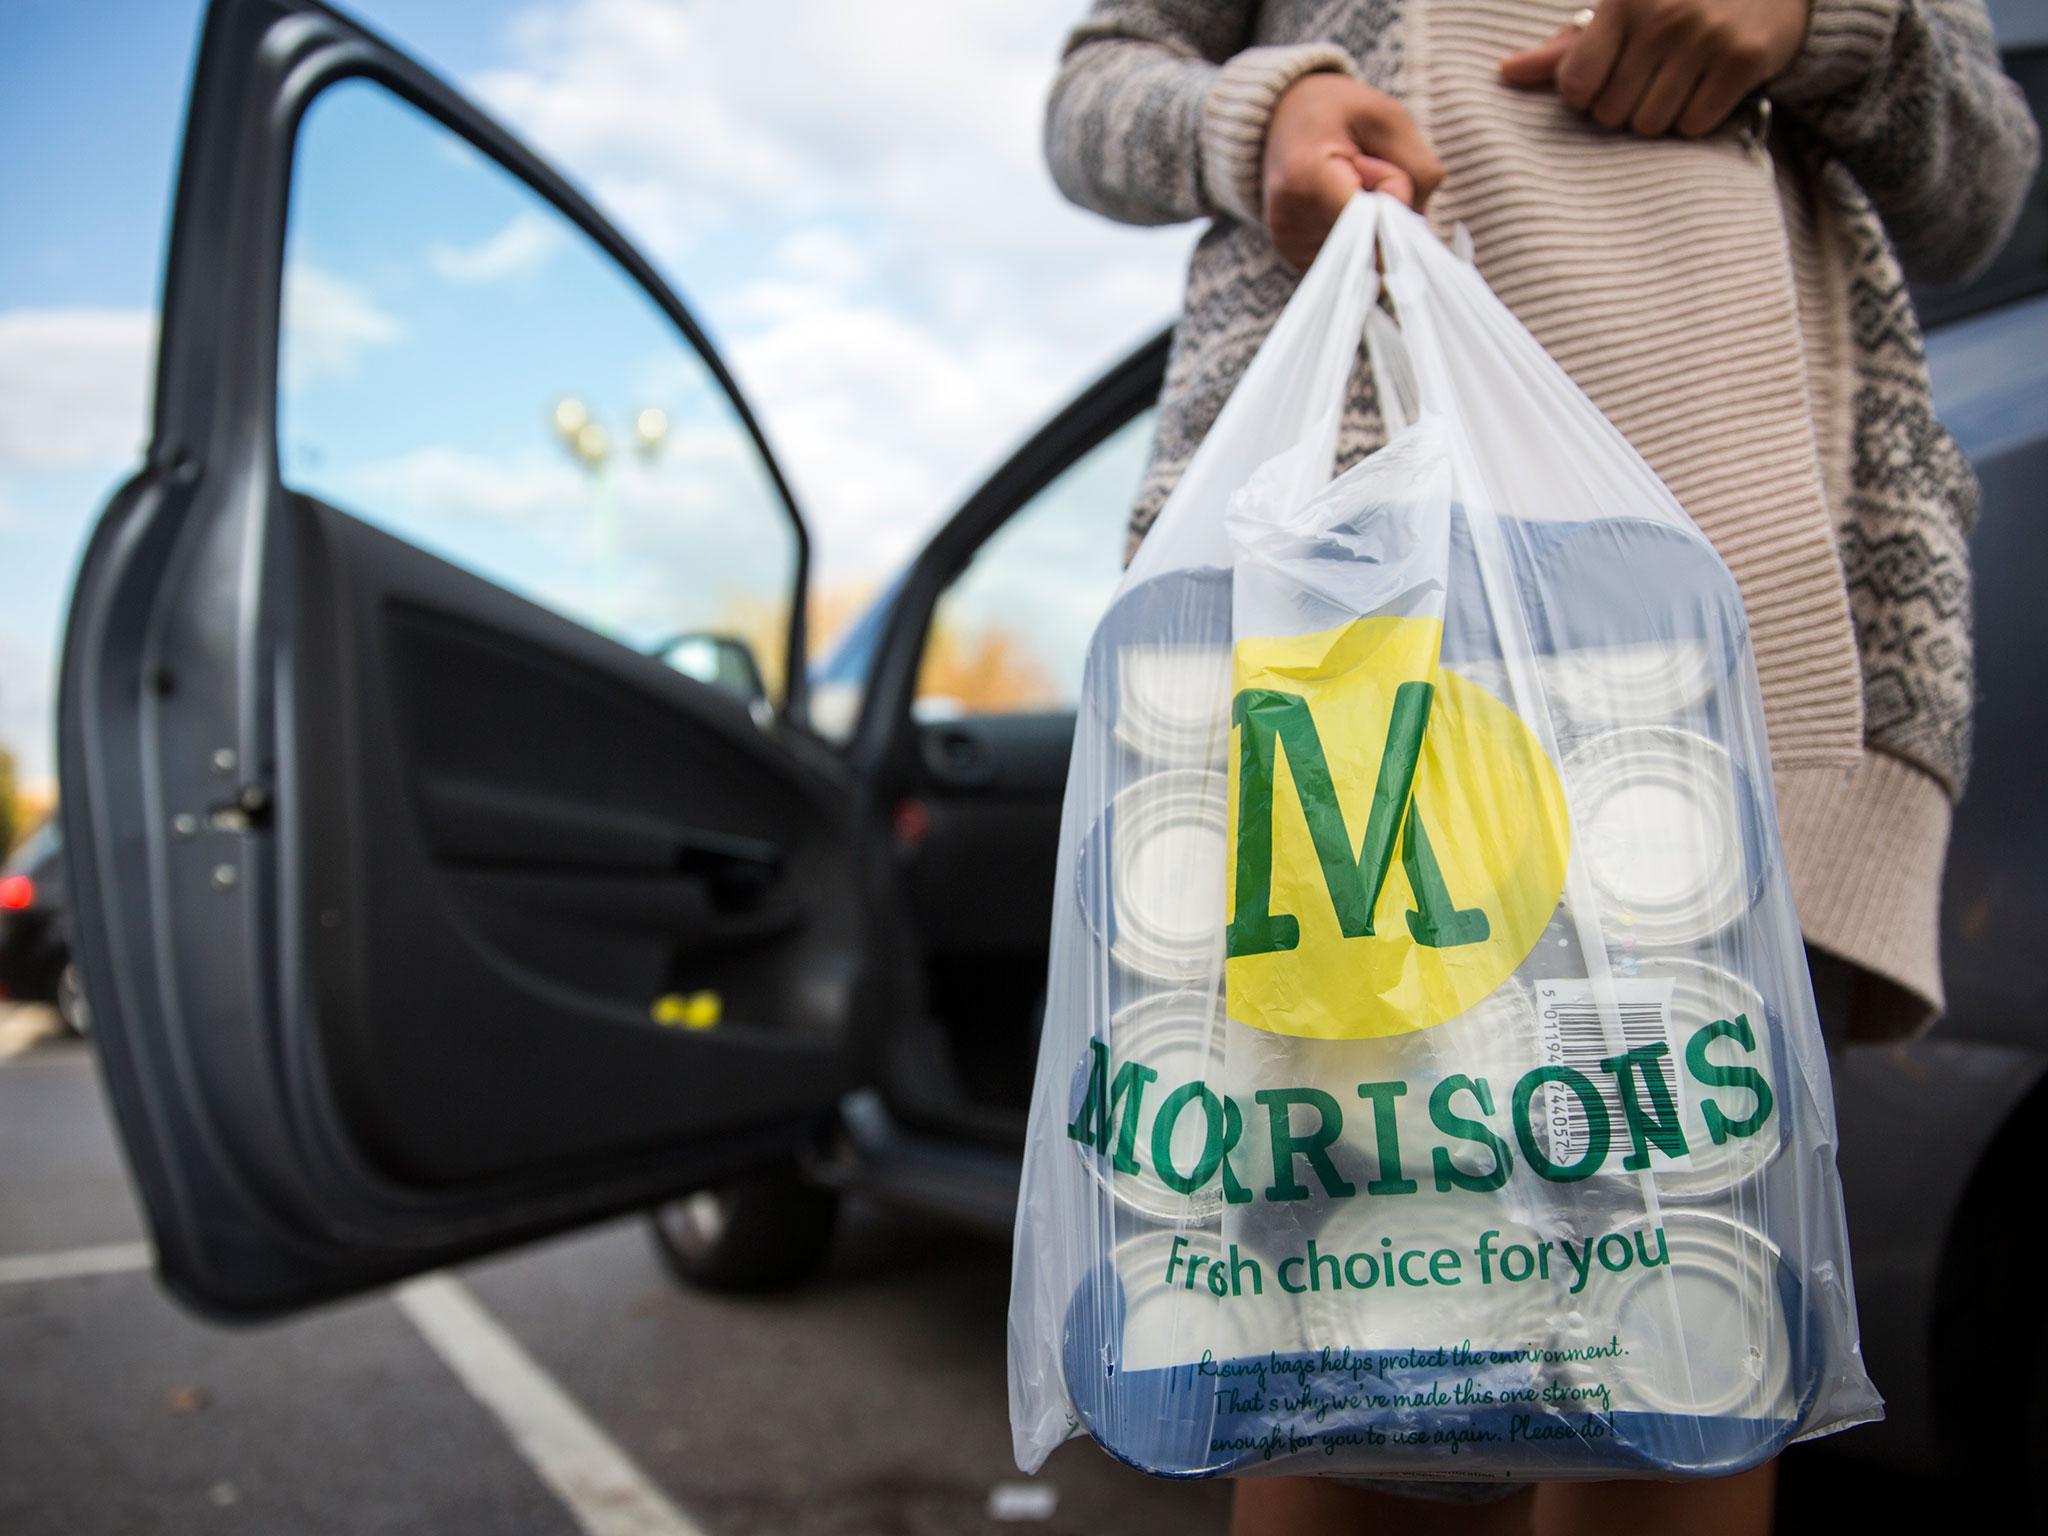 Morrisons deal with Amazon is an attempt to evolve the business